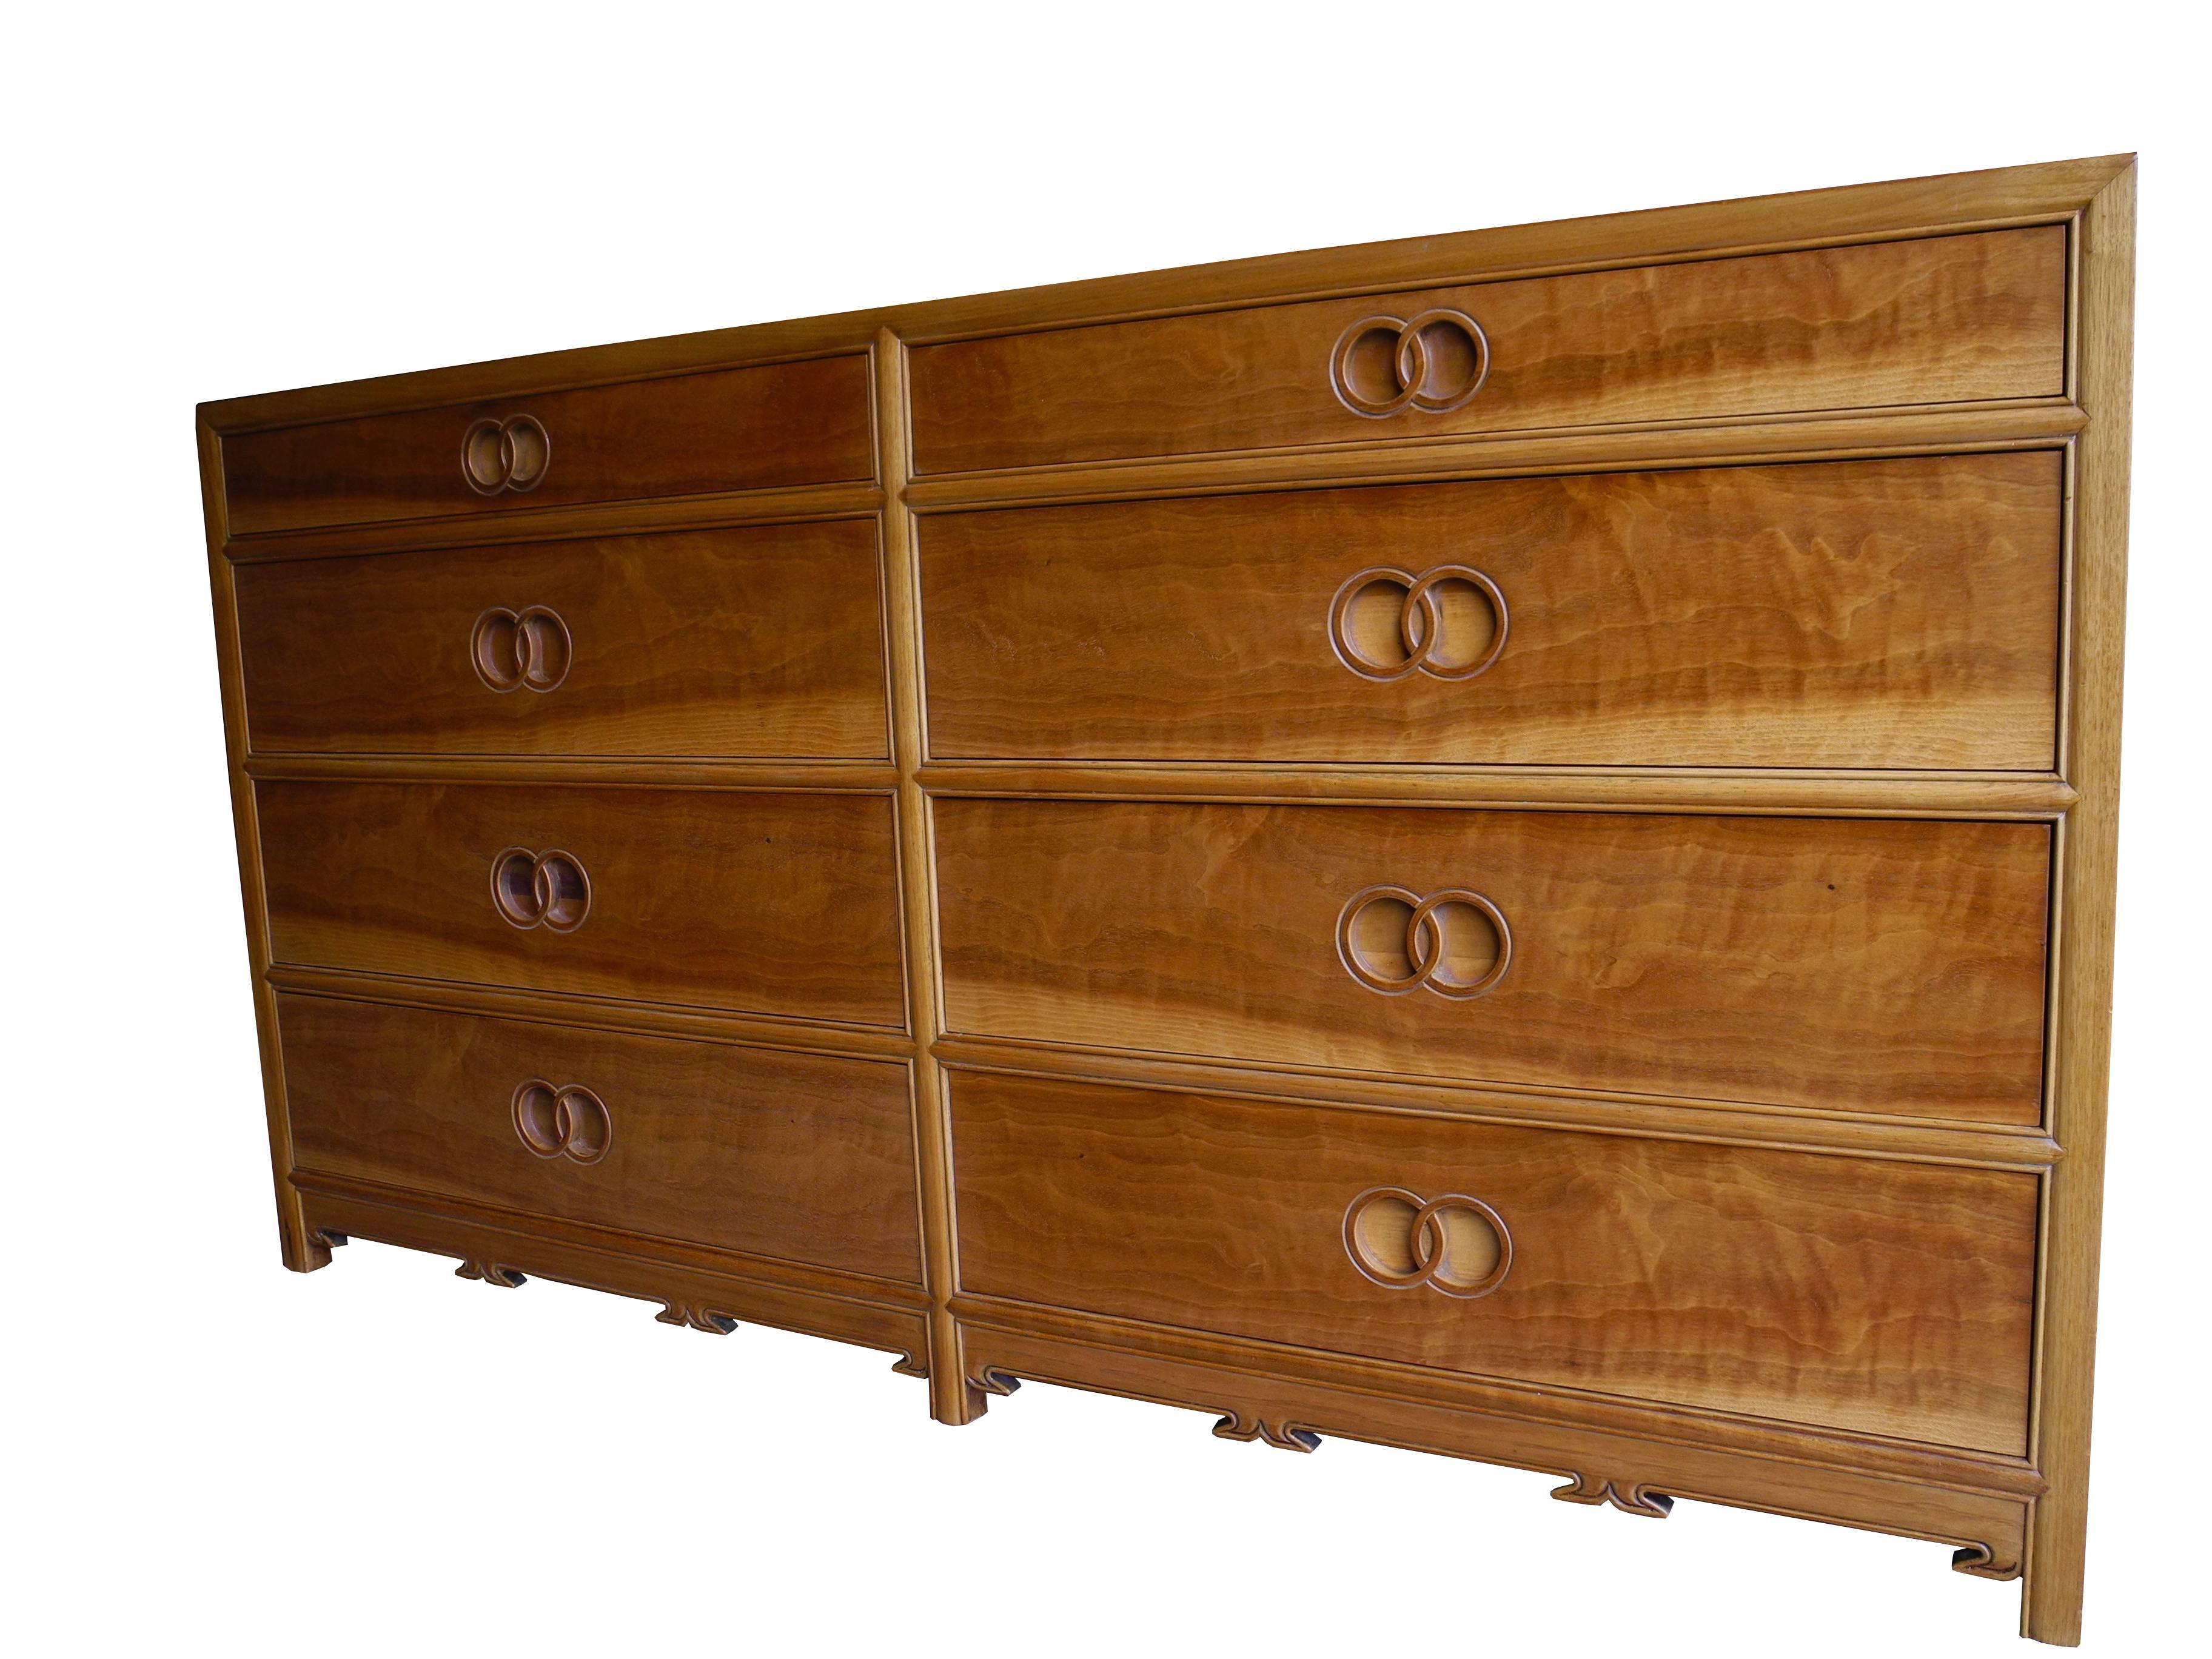 20th Century Modern Eight-Drawer Walnut Dresser with Decorative Details by Michael Taylor